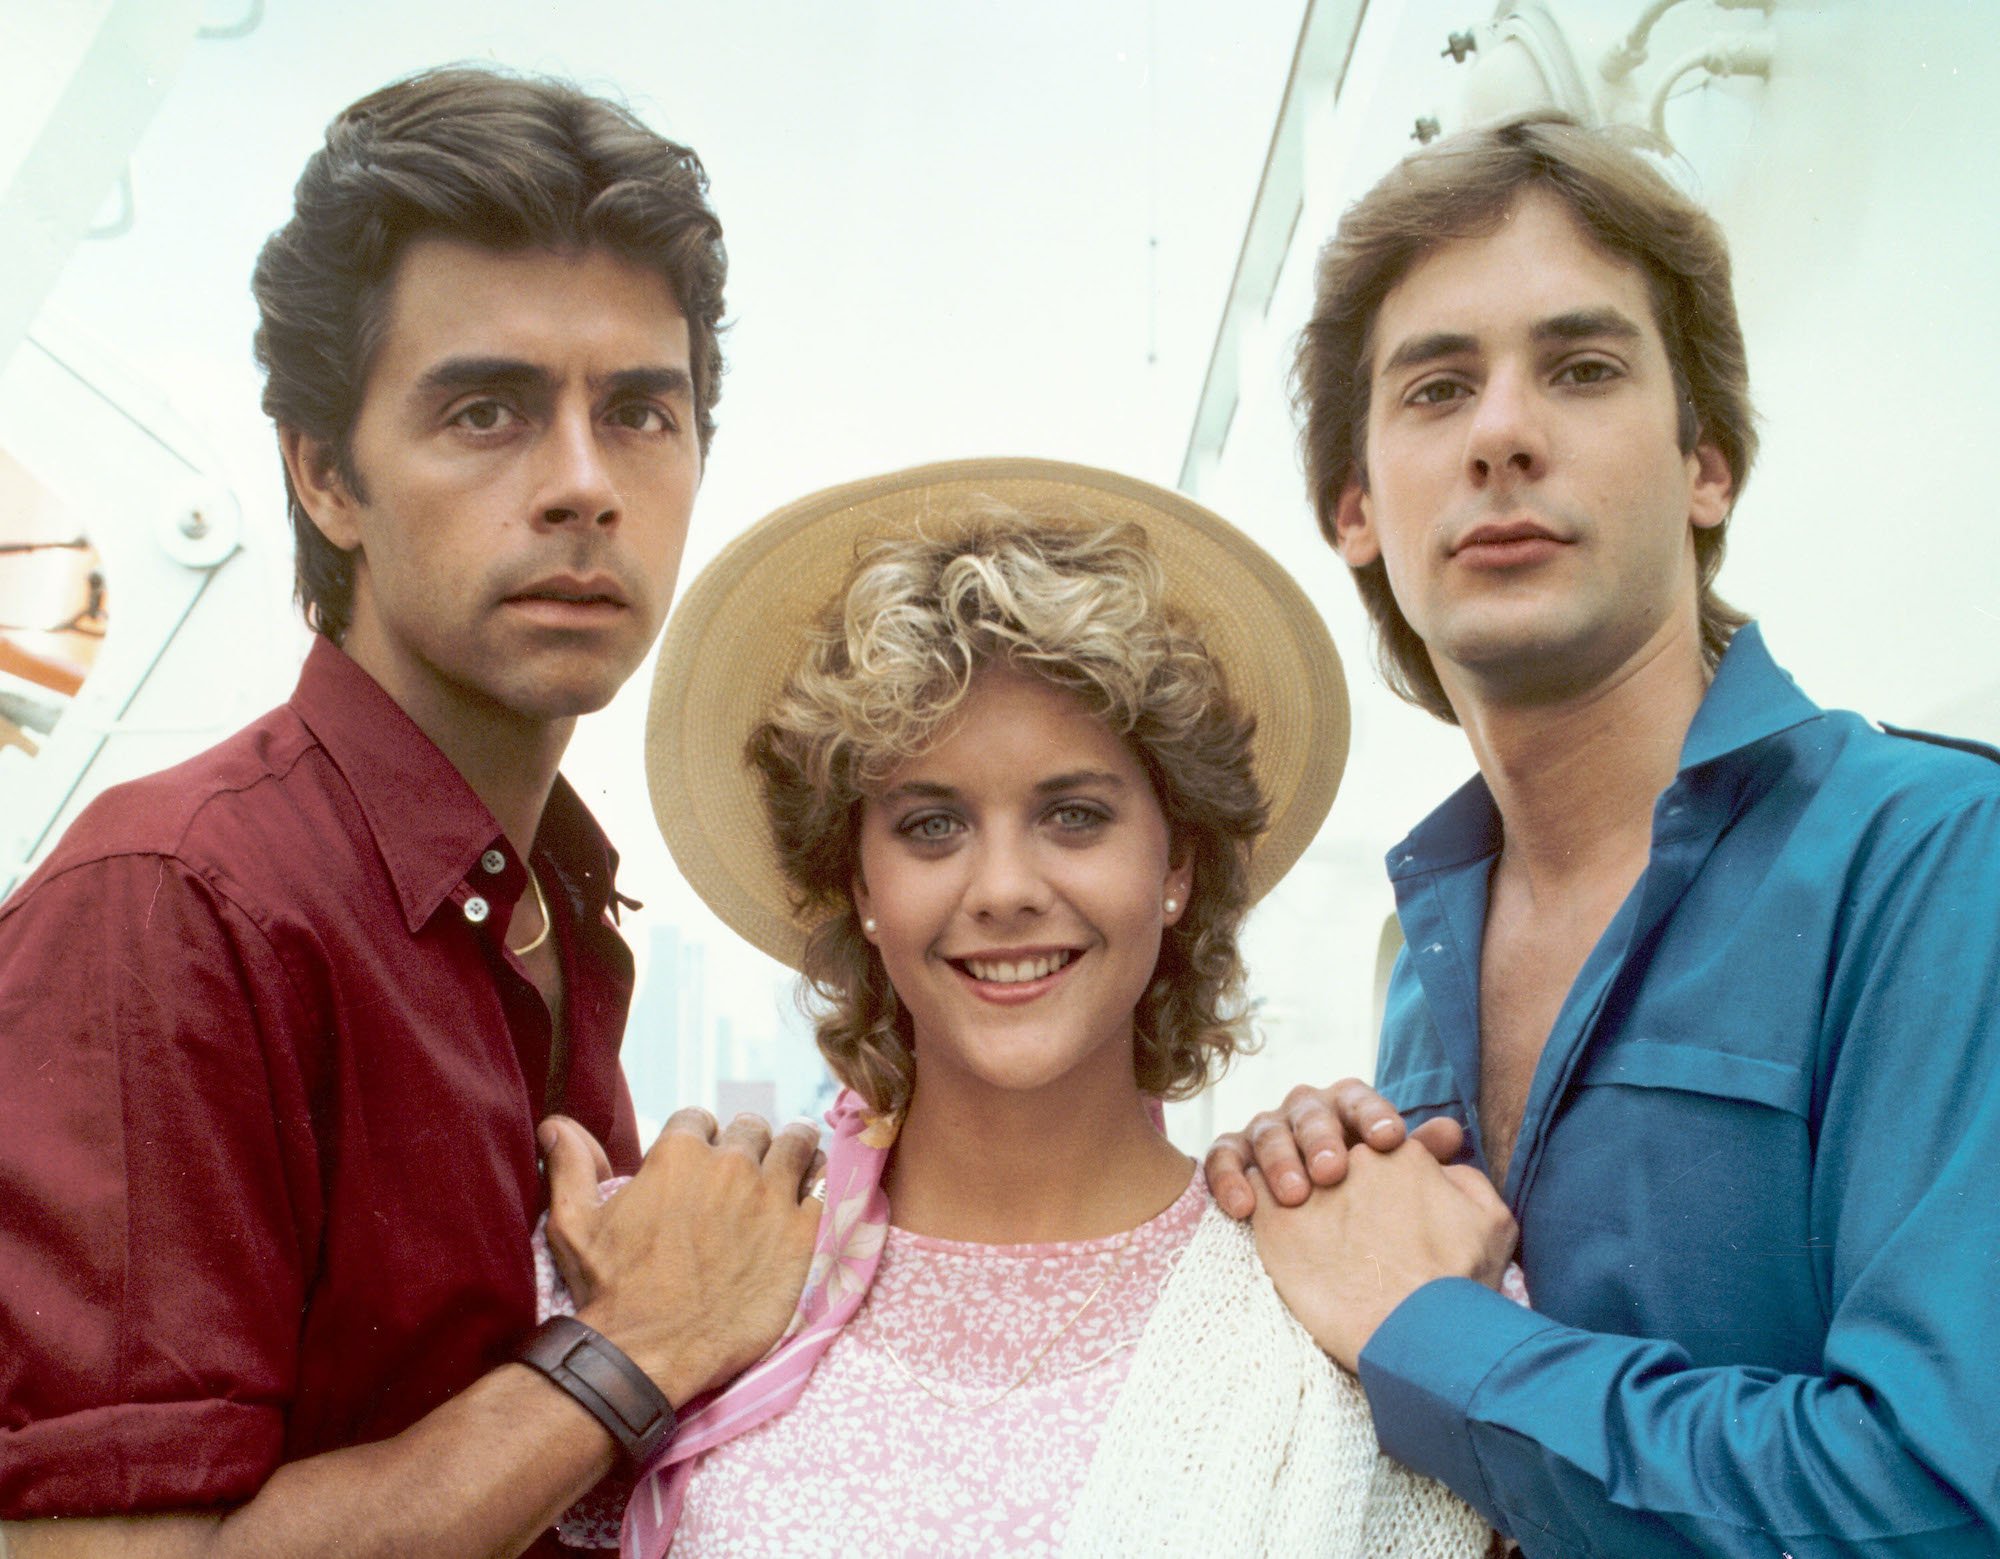 (L-R) Frank Runyeon, Meg Ryan, and Scott Bryce looking at the camera